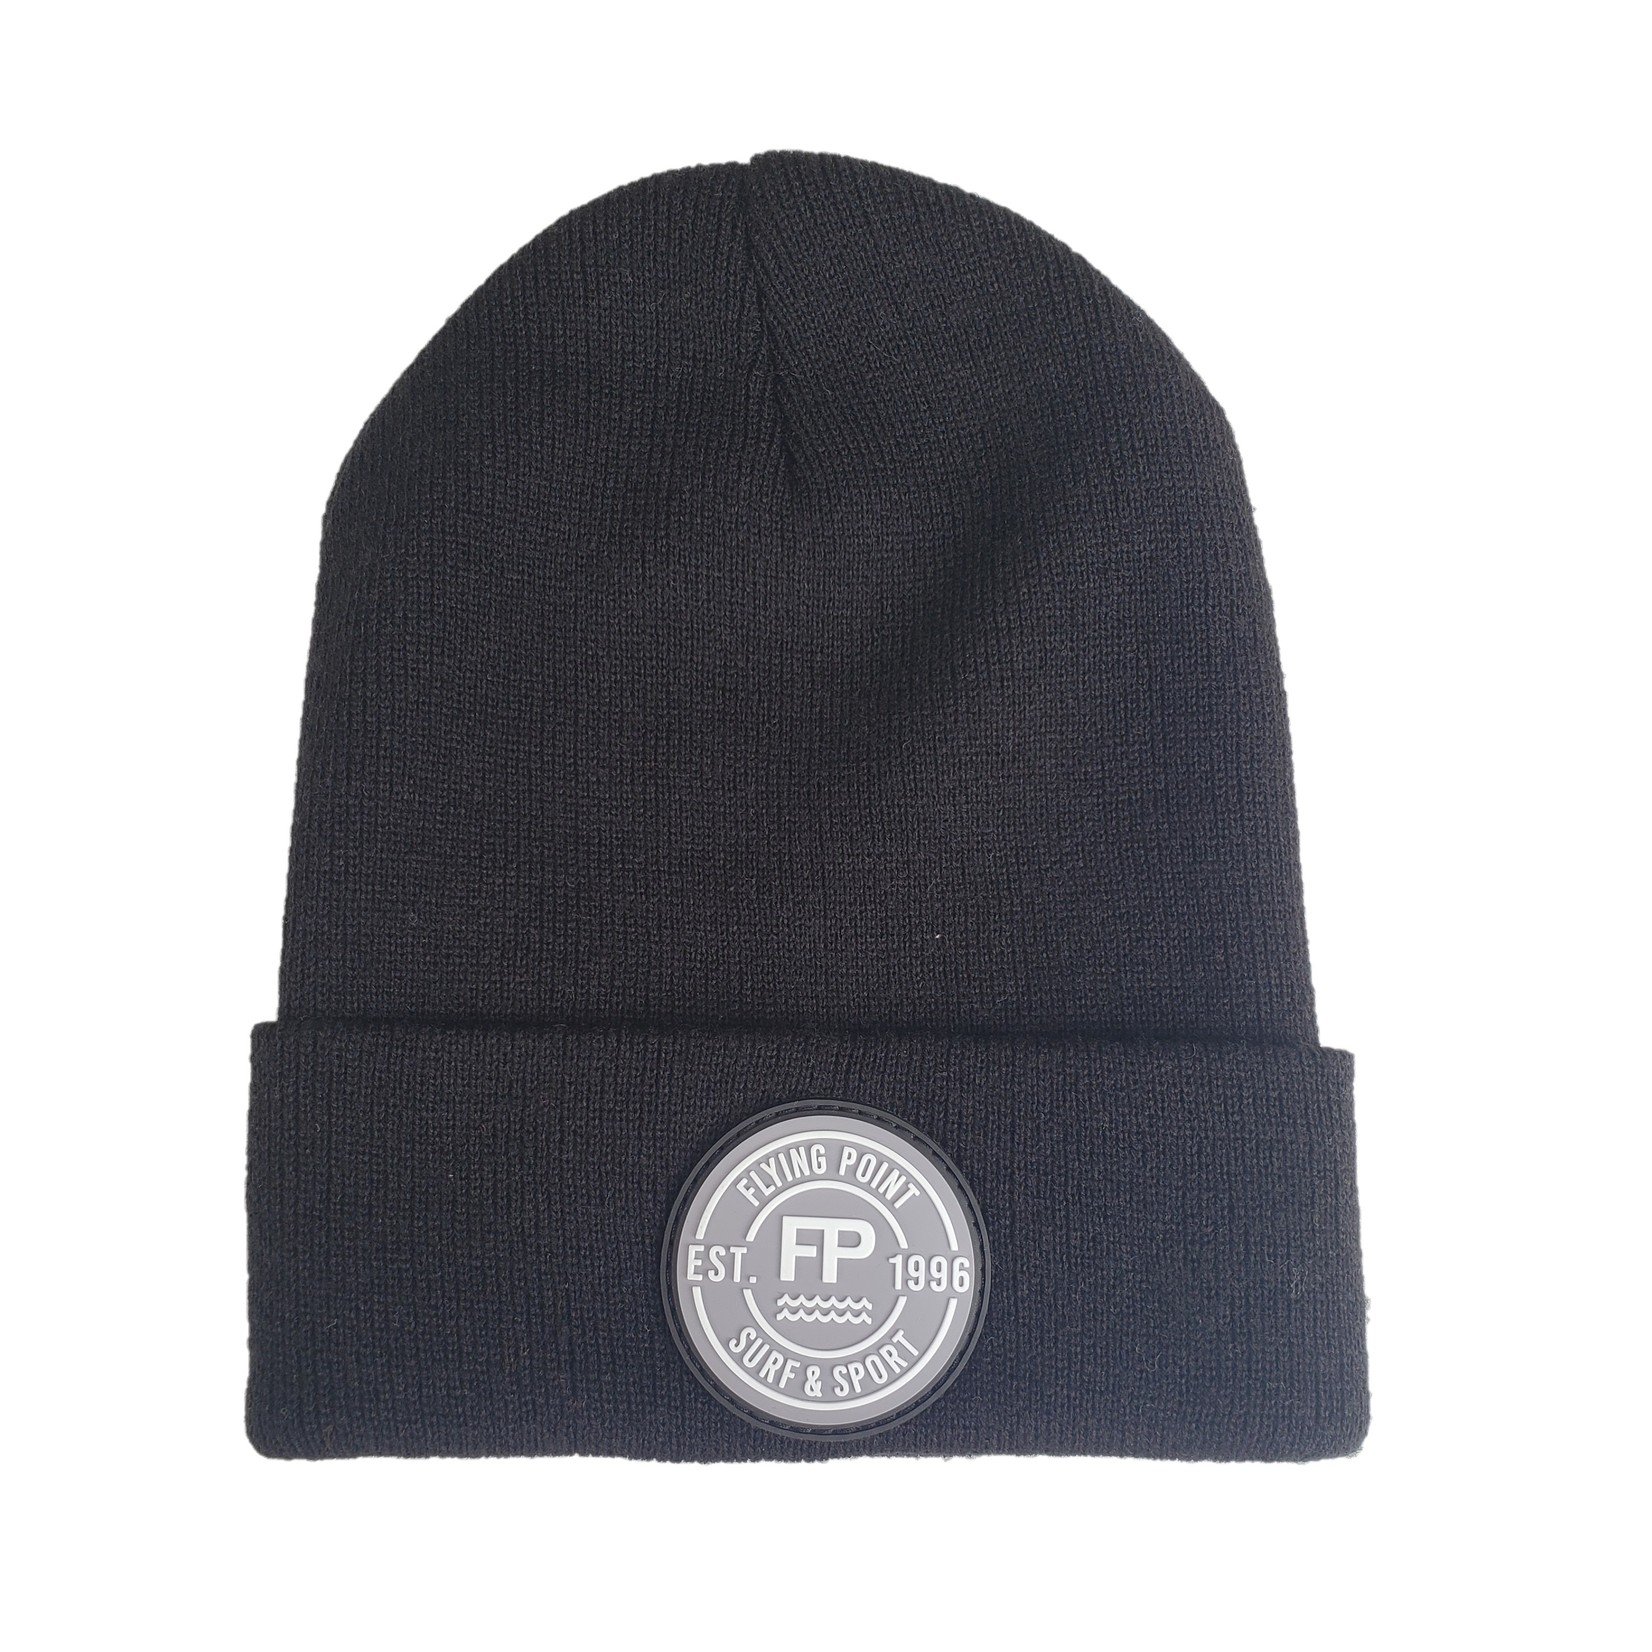 Flying Point Rubber Stamp Beanie Hat